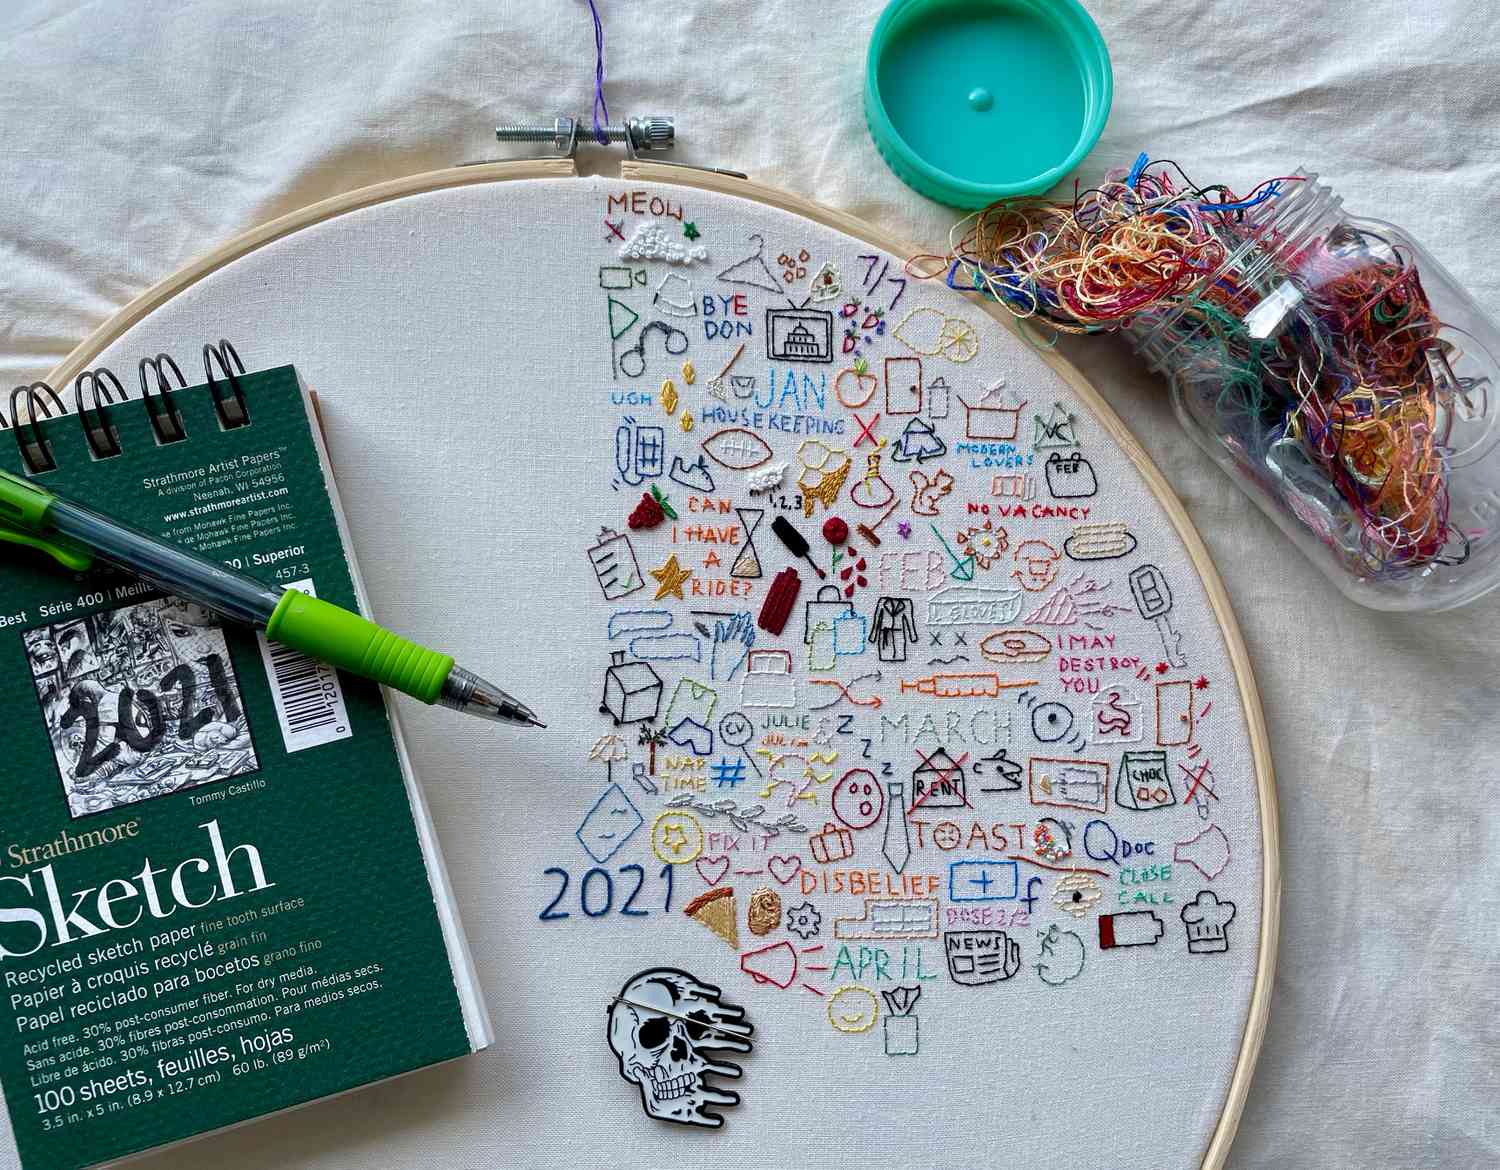 Embroidery journaling set-up with sketchbook 